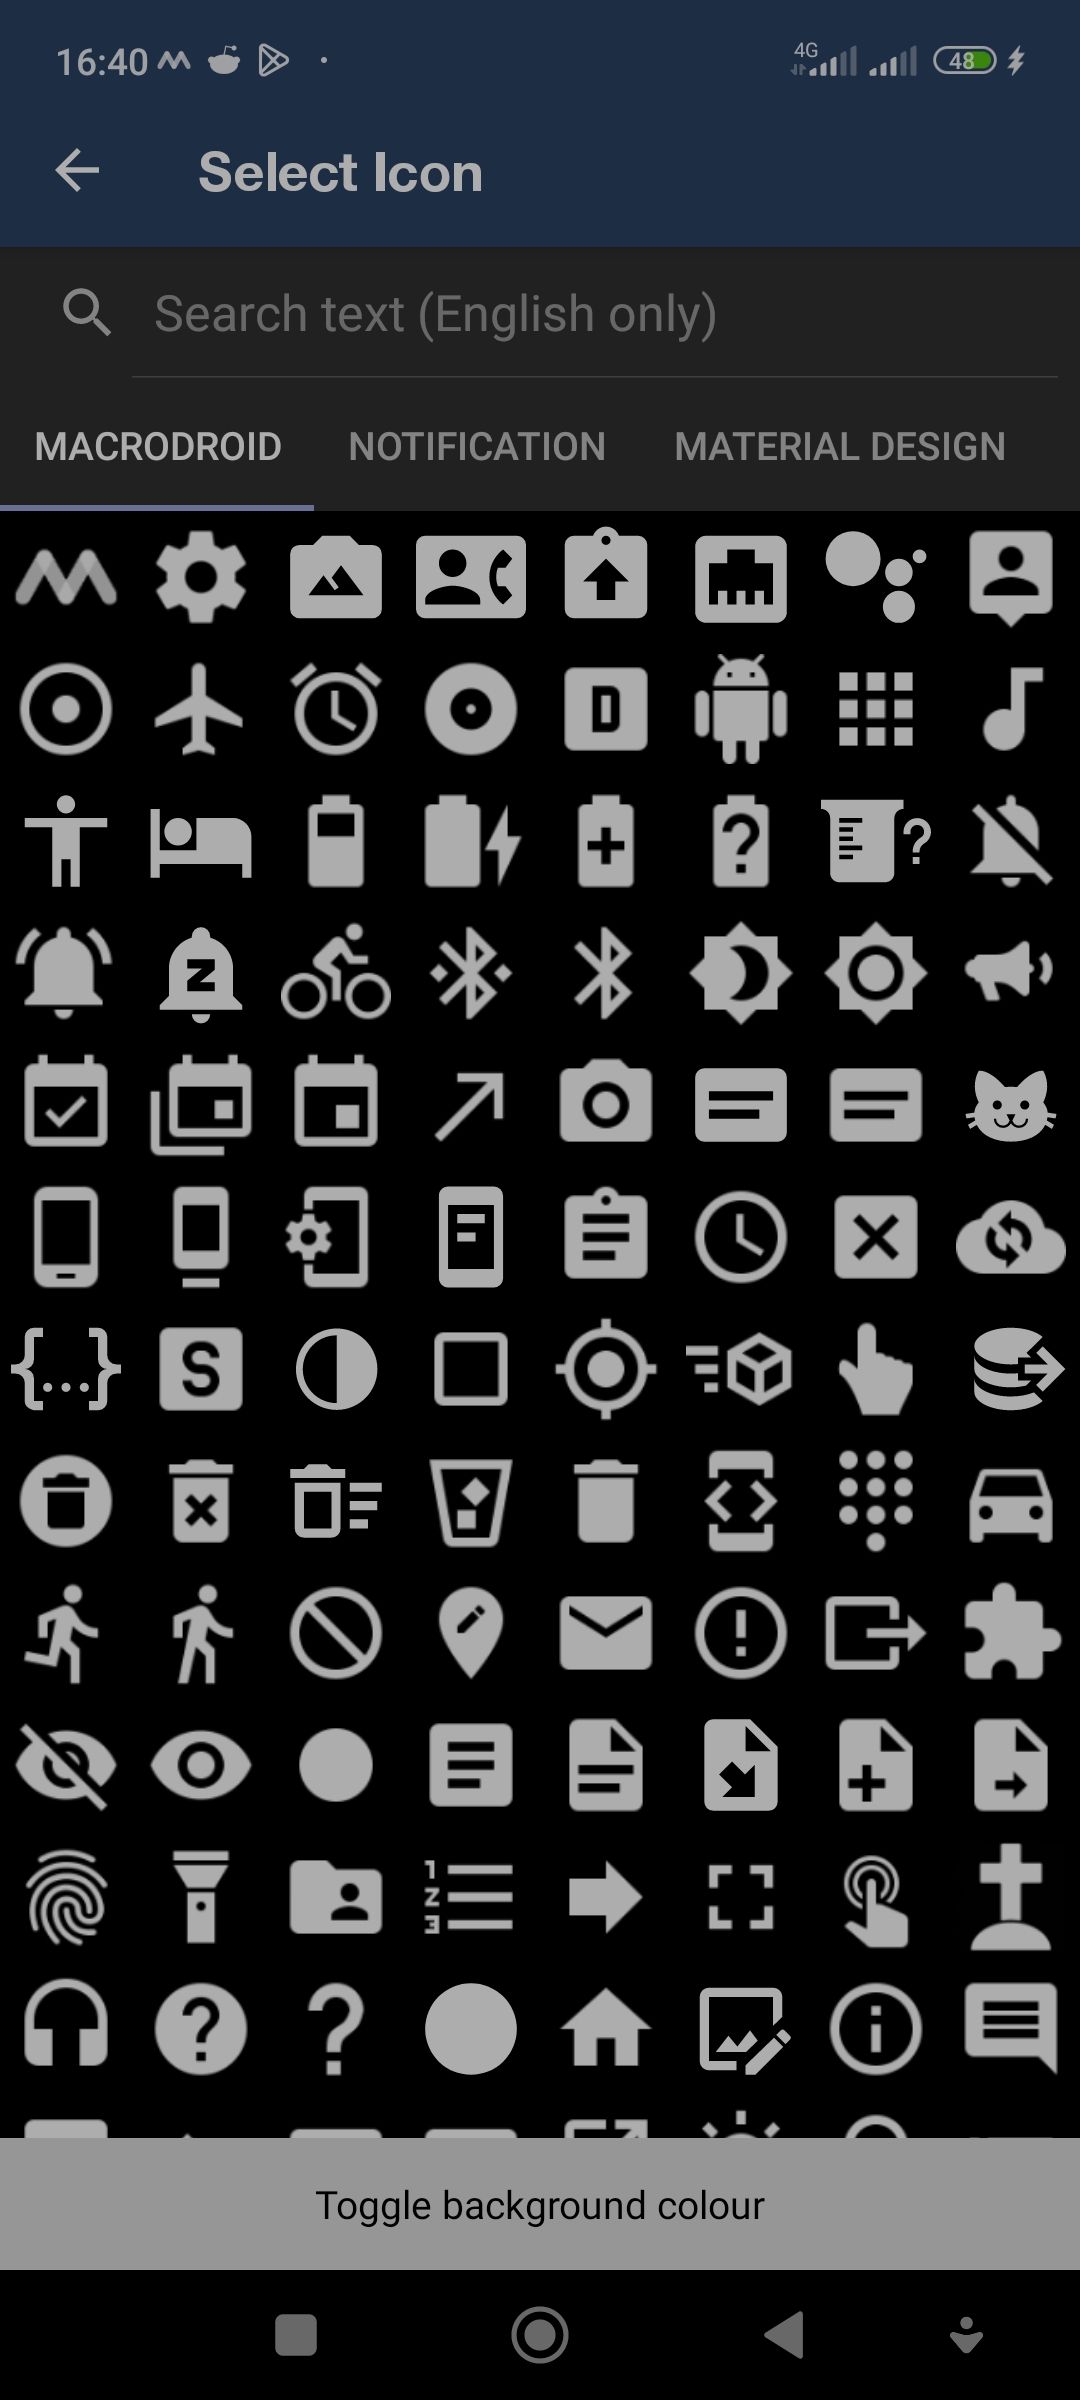 Usable icons available on MacroDroid